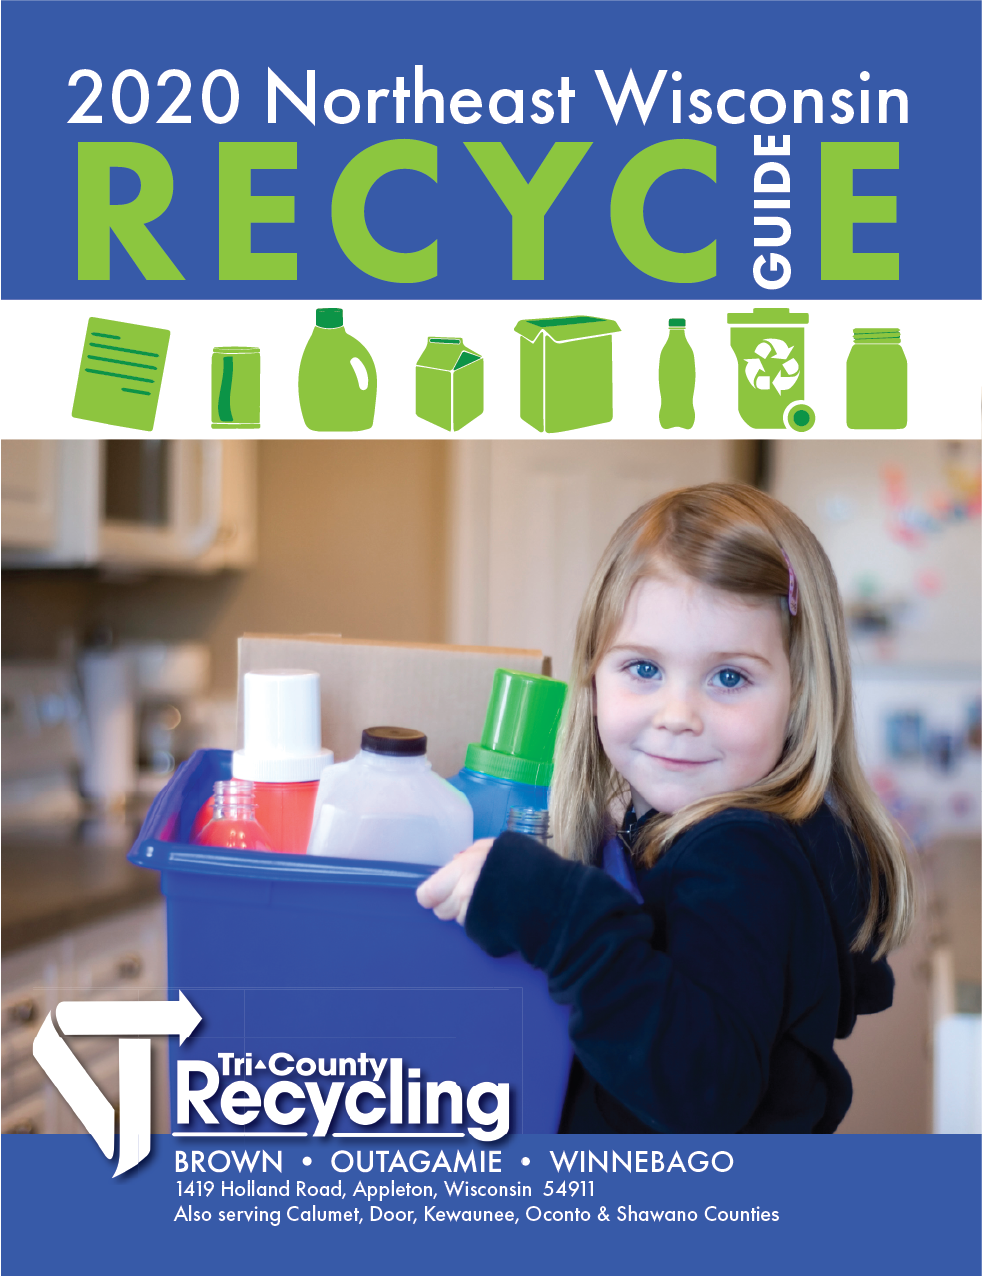 Click here to see the 2020 Northeast Wisconsin Recycle Guide